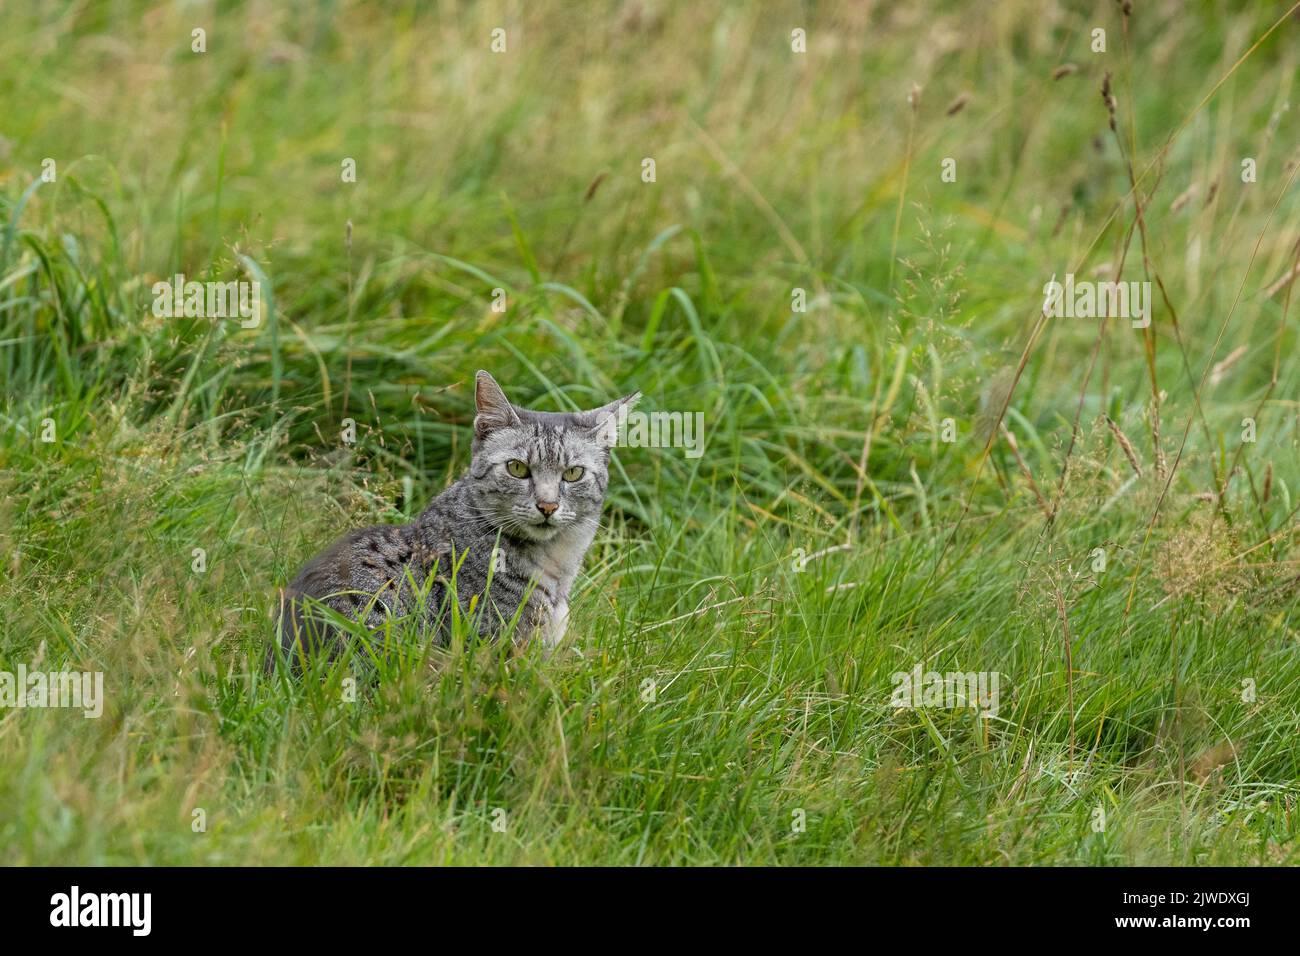 An Egyptian Mau cat in a field. Stock Photo